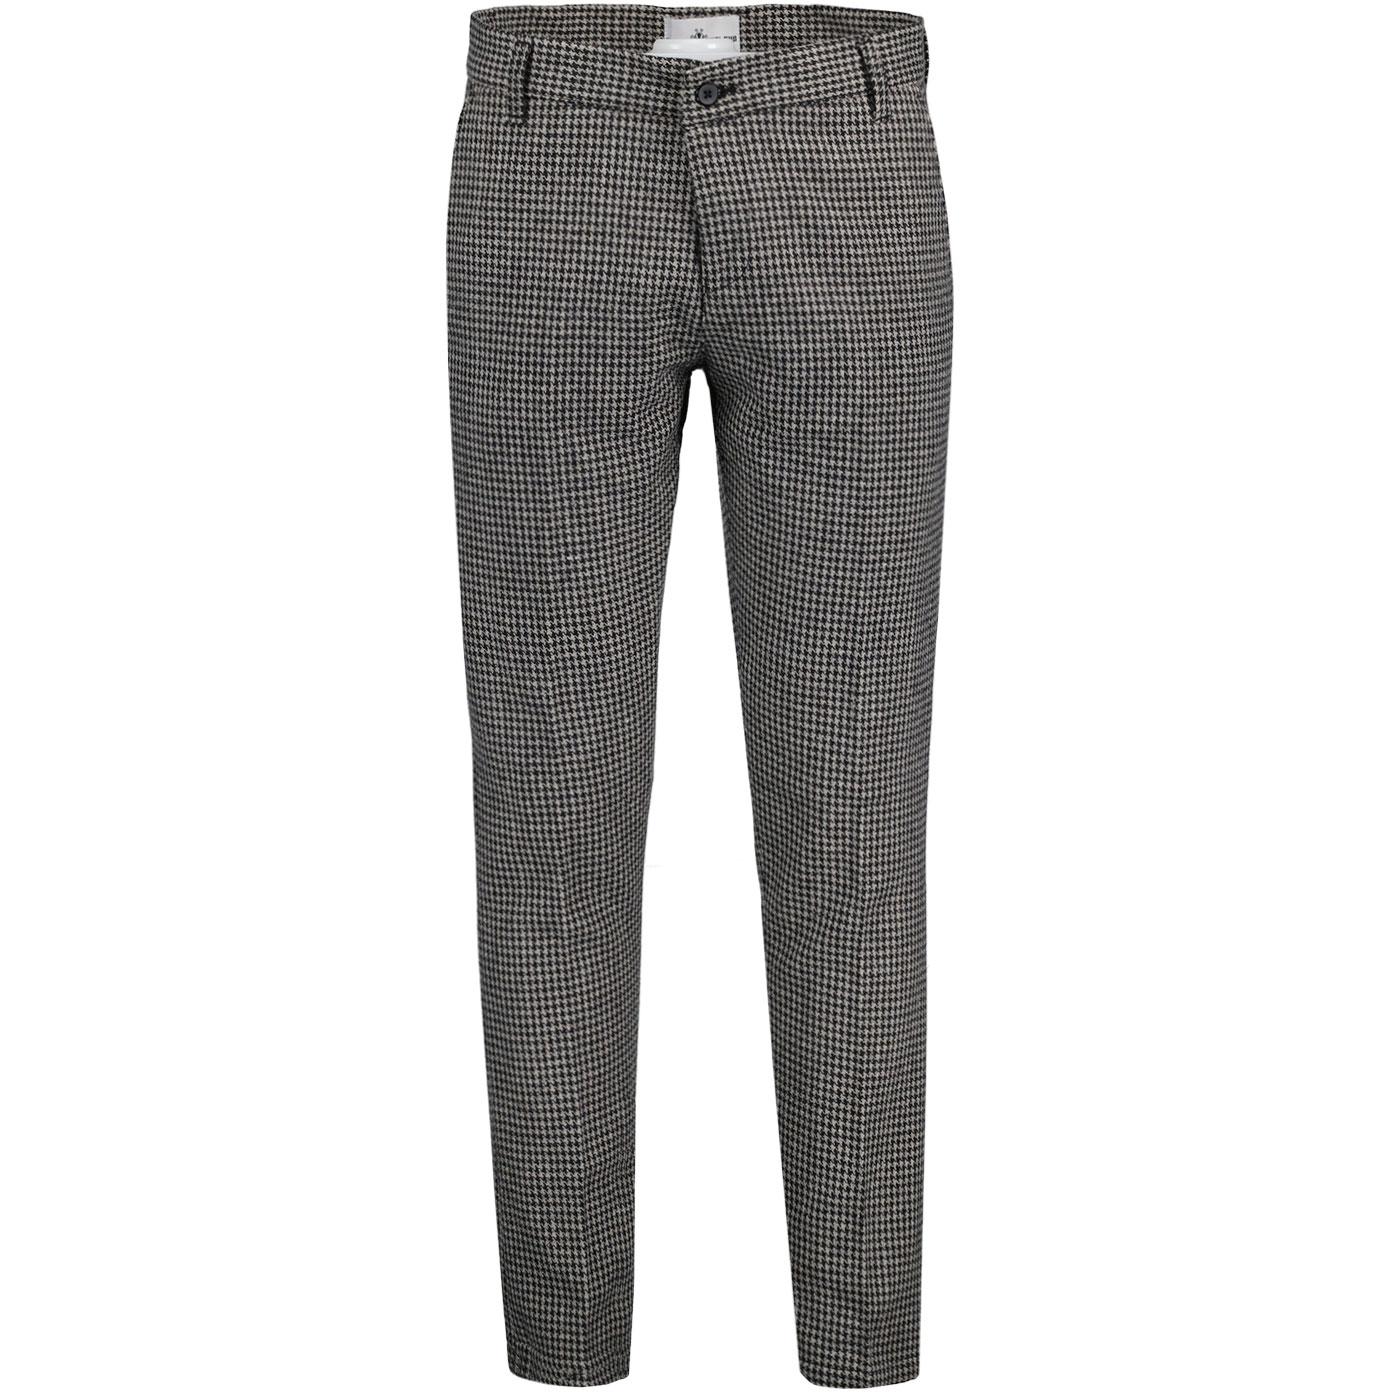 Dylan MADCAP ENGLAND Mod Brushed Dogtooth Trousers